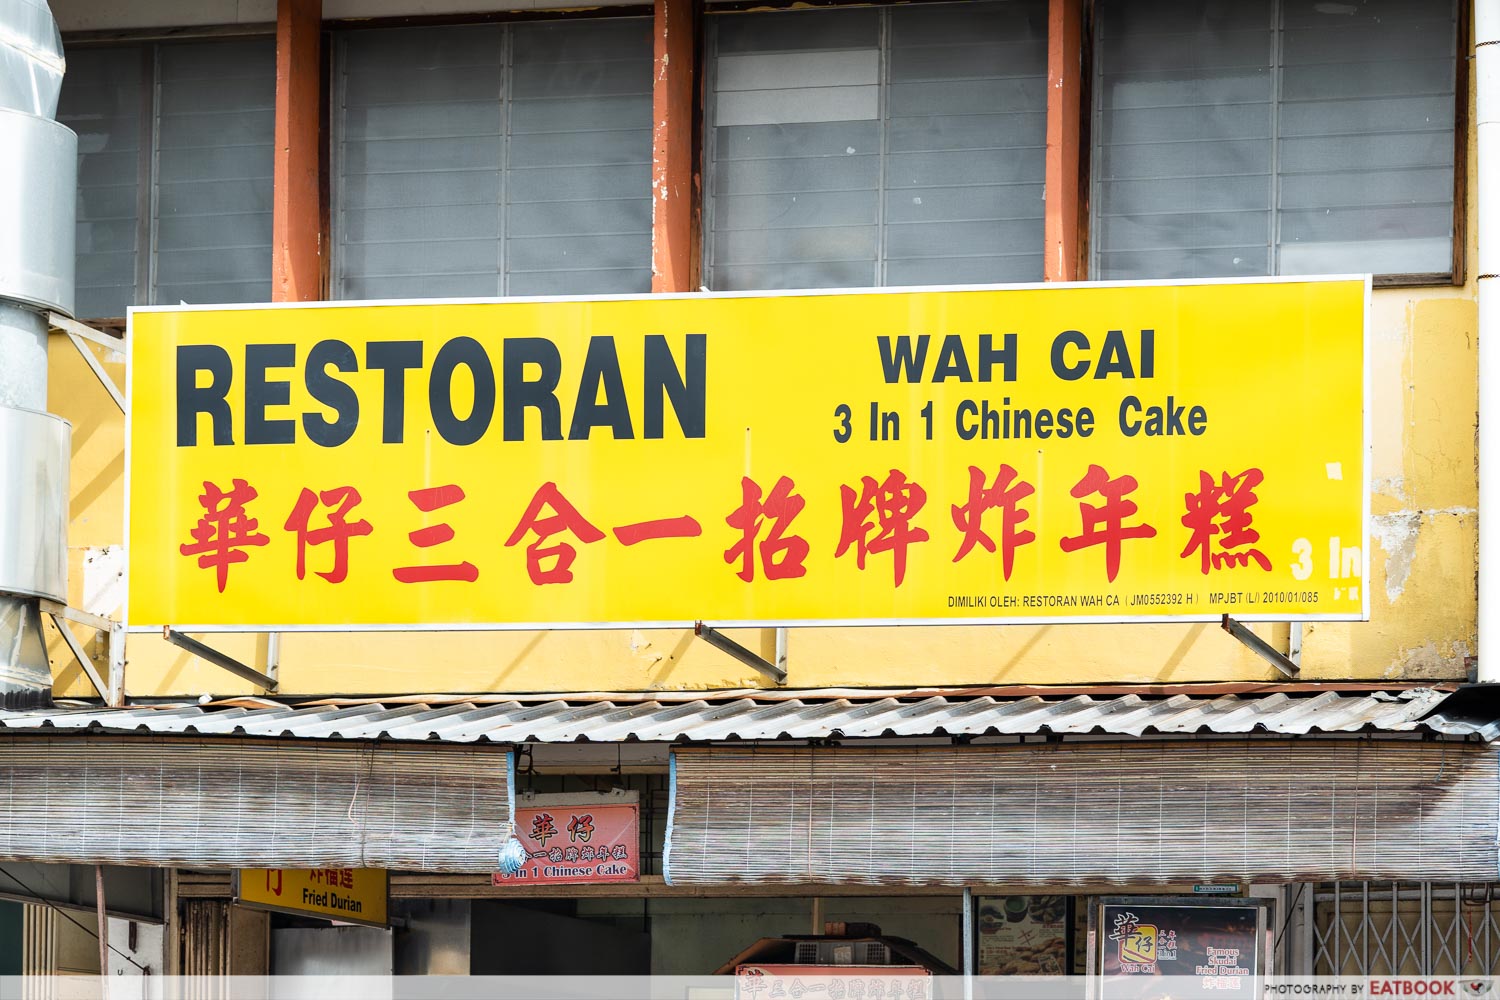 wah cai 3 in 1 chinese cake - signage